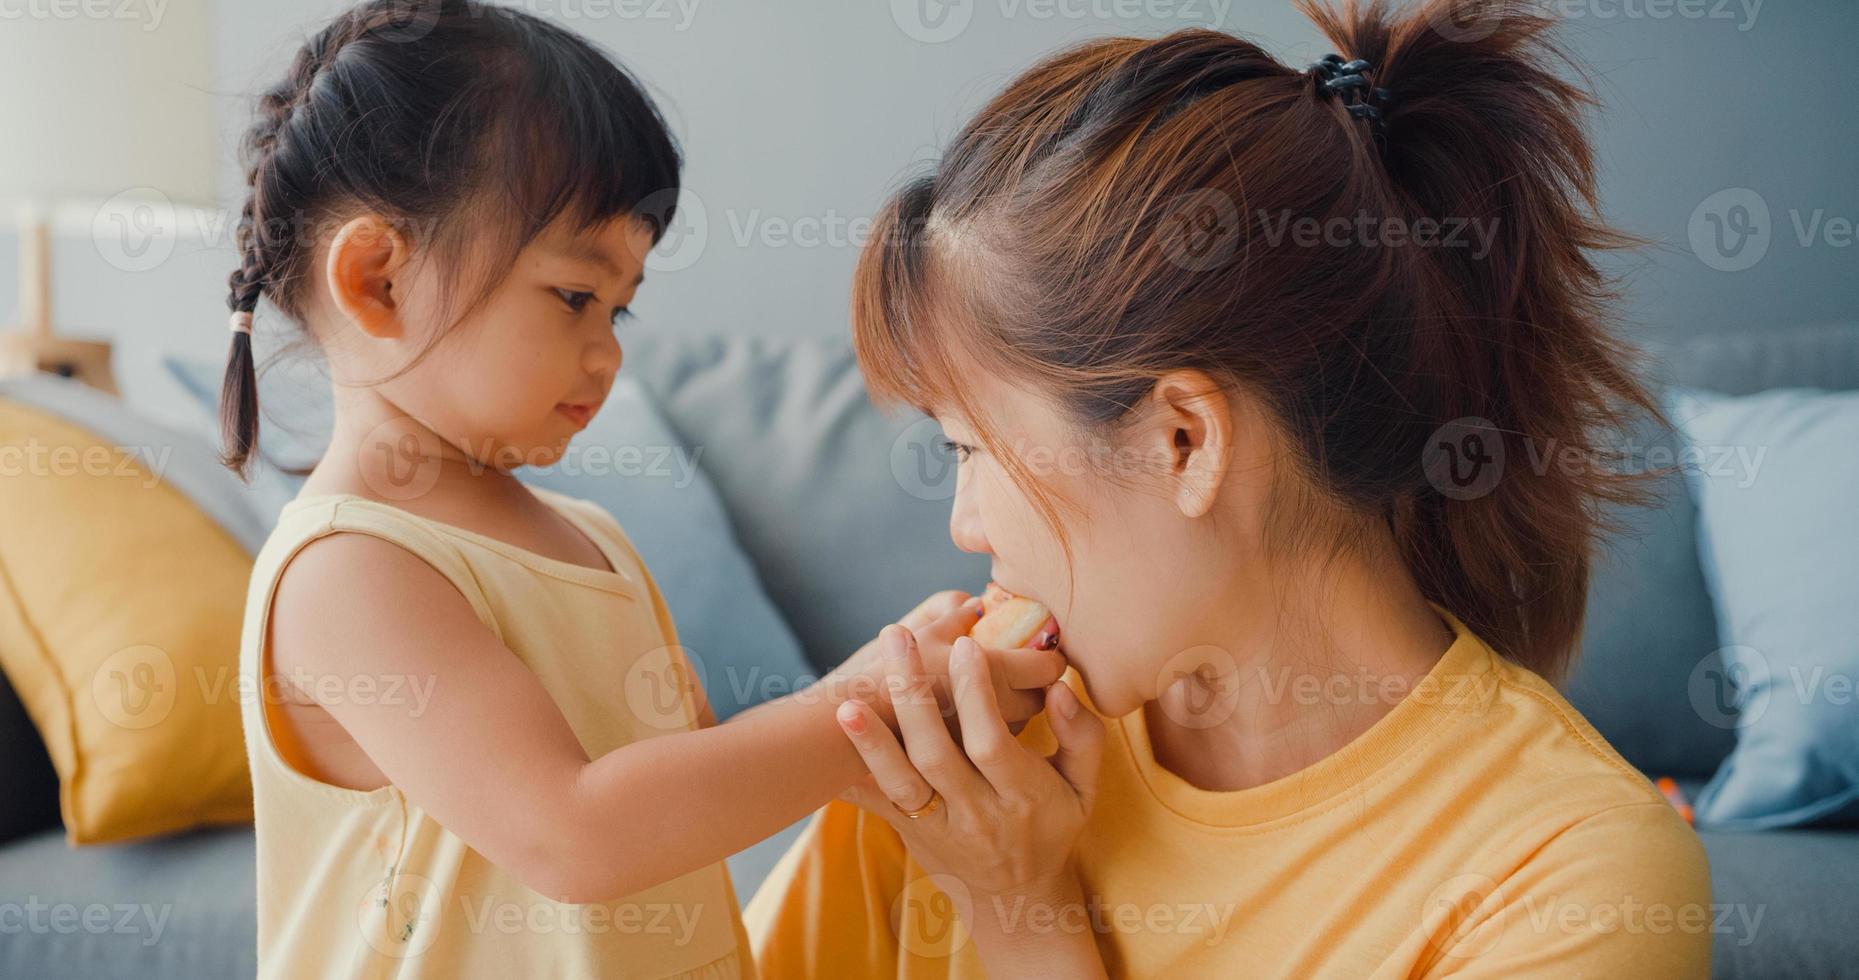 Happy cheerful Asia family mom and toddler girl eating donuts and having fun relax enjoy on couch in living room at house. Spending time together, Social distance, Quarantine for coronavirus. photo